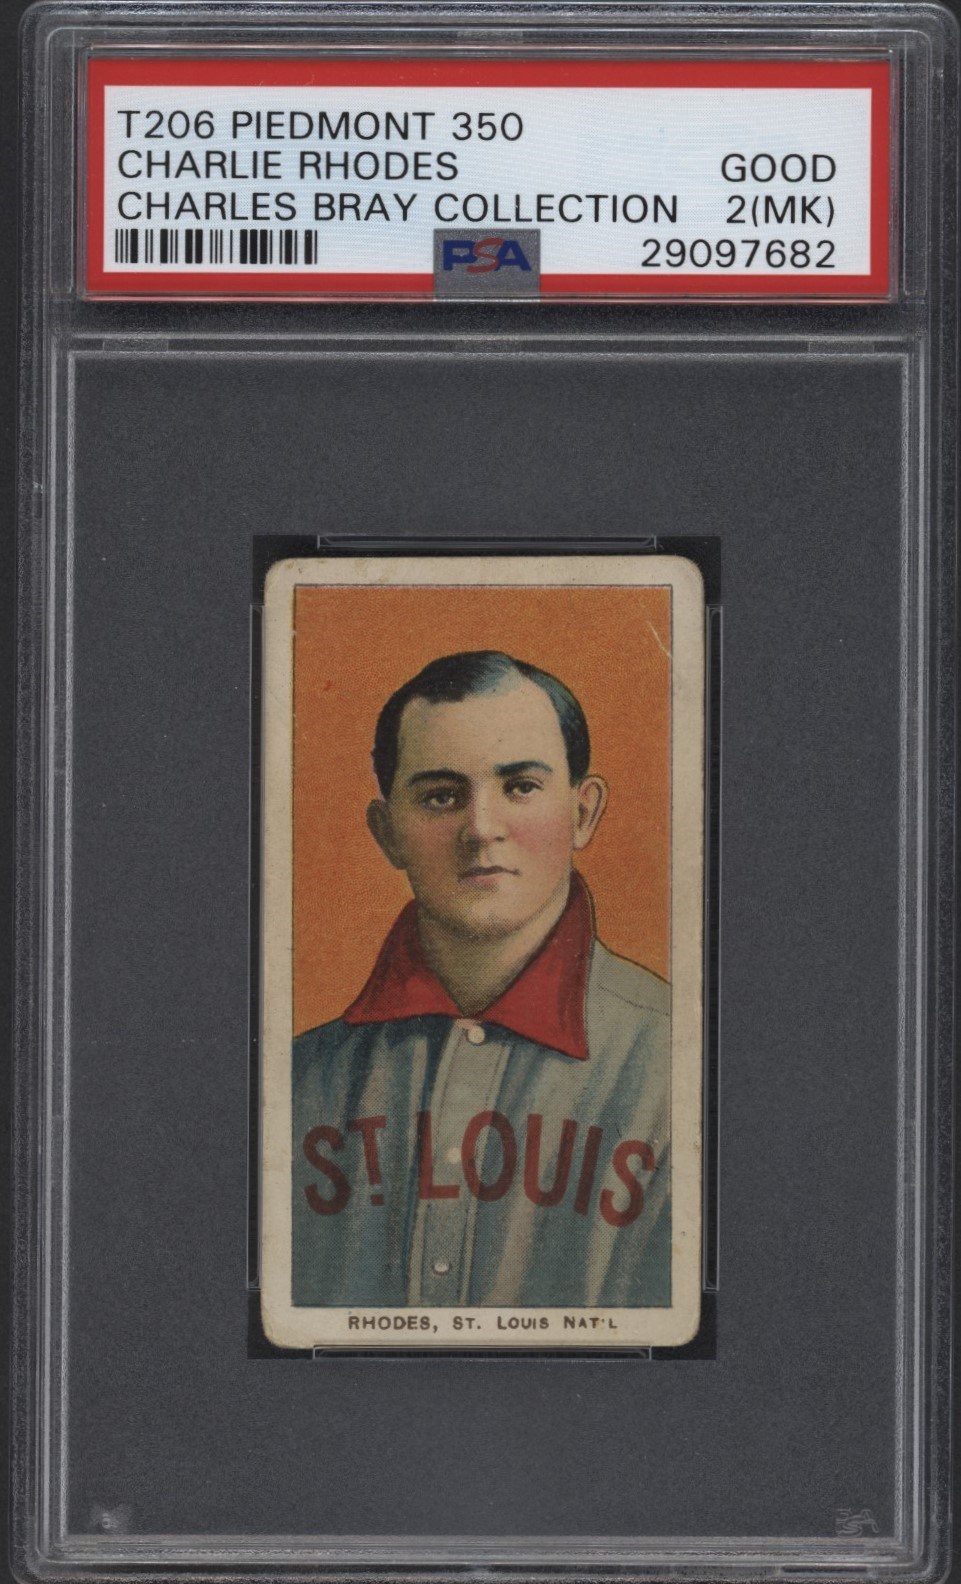 T206 Piedmont 350 Charlie Rhodes PSA 2 From the Charles Bray Collection